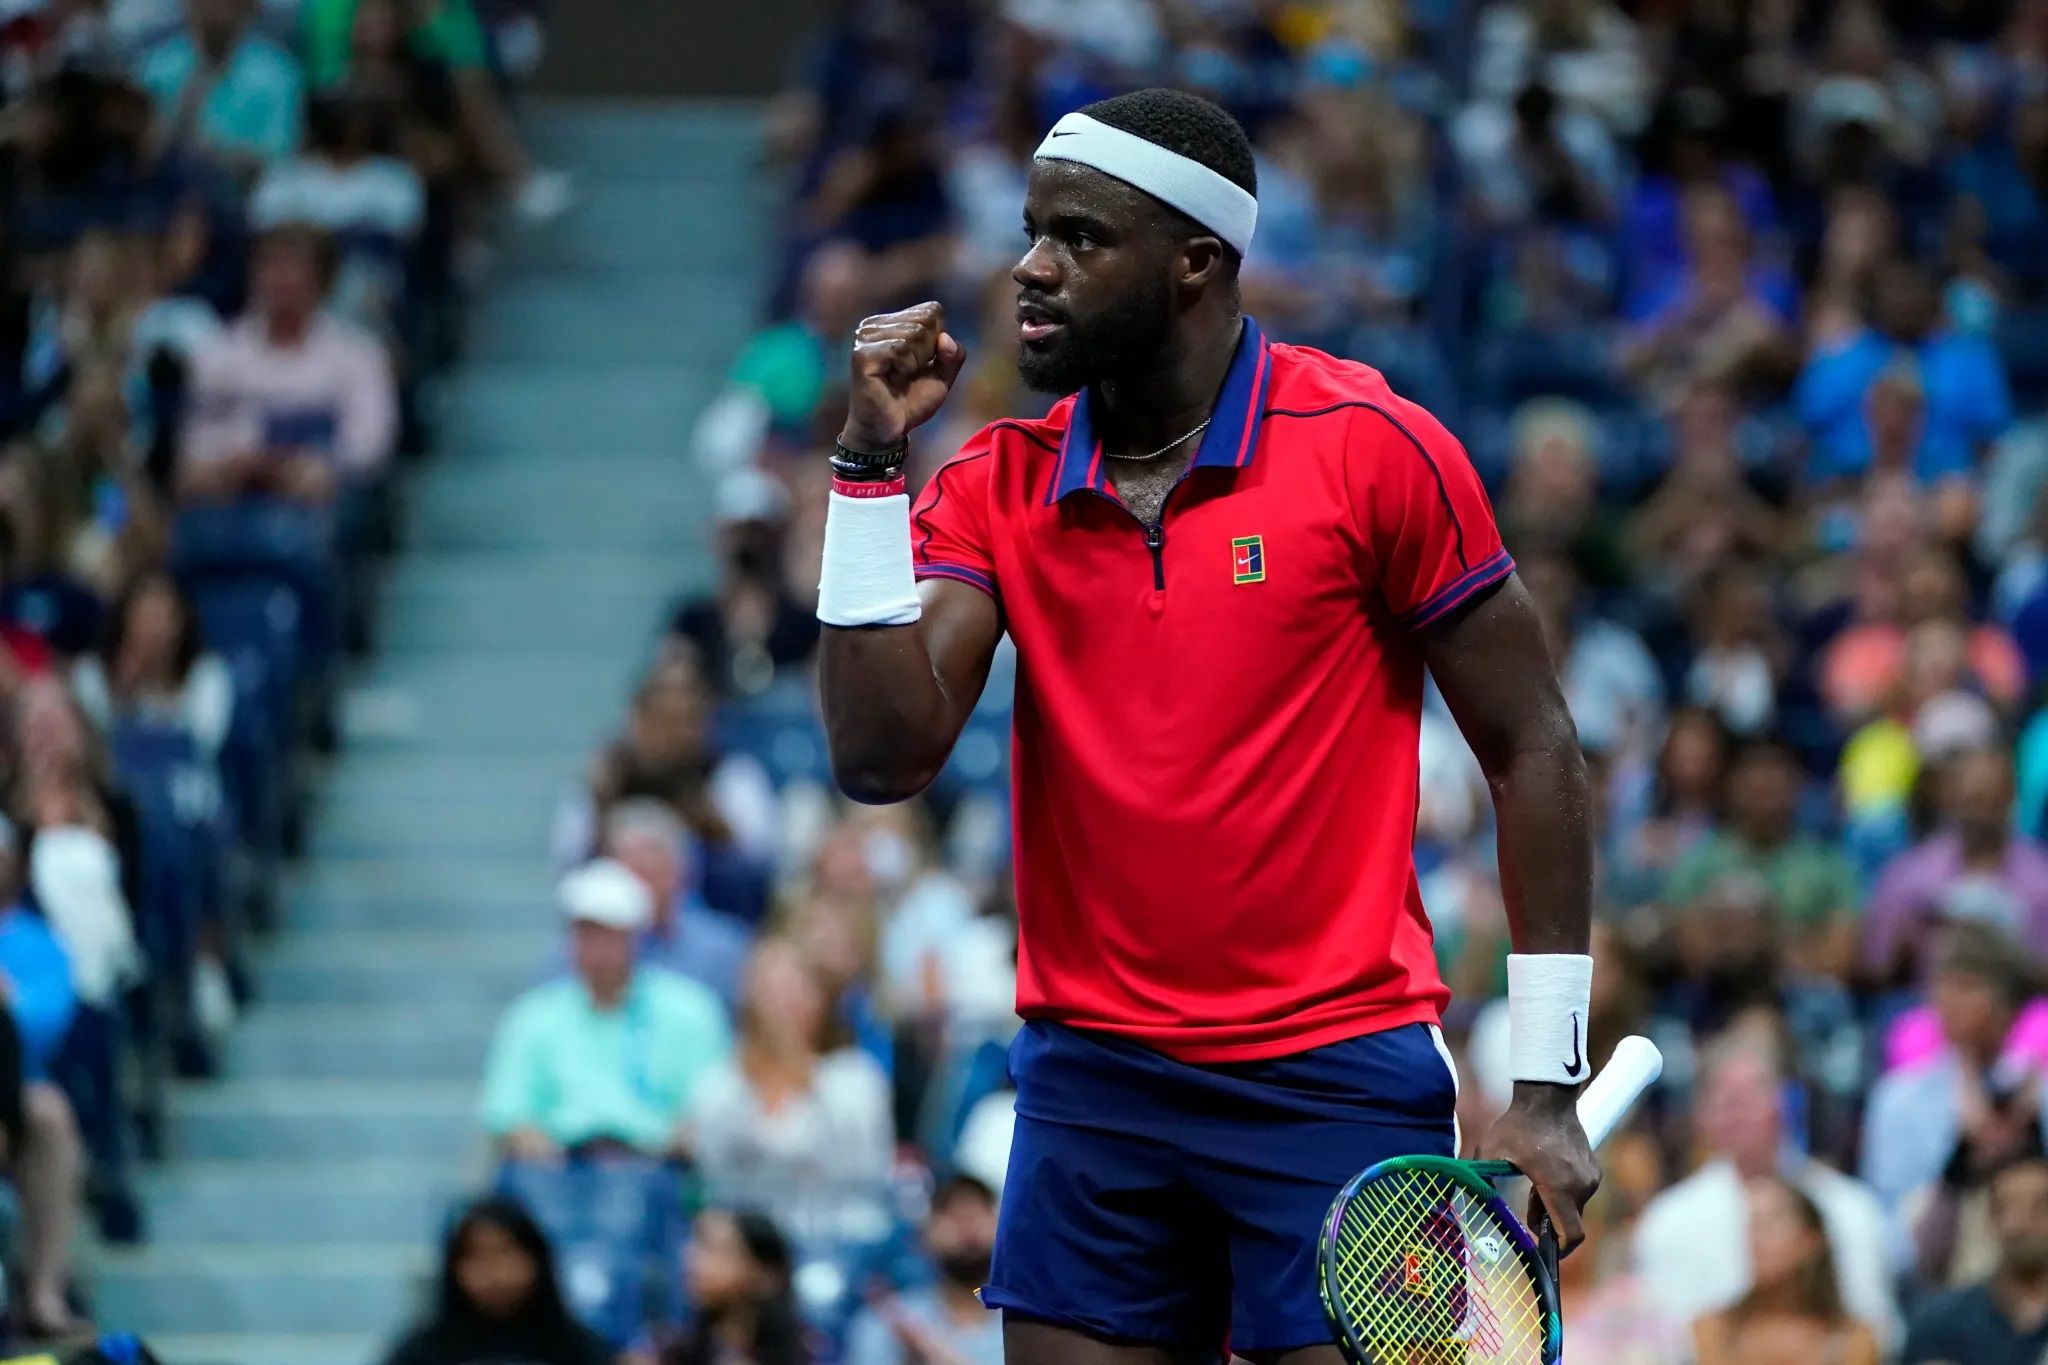 David Goffin vs Frances Tiafoe Prediction, Betting Tips and Odds | 03 JULY 2022